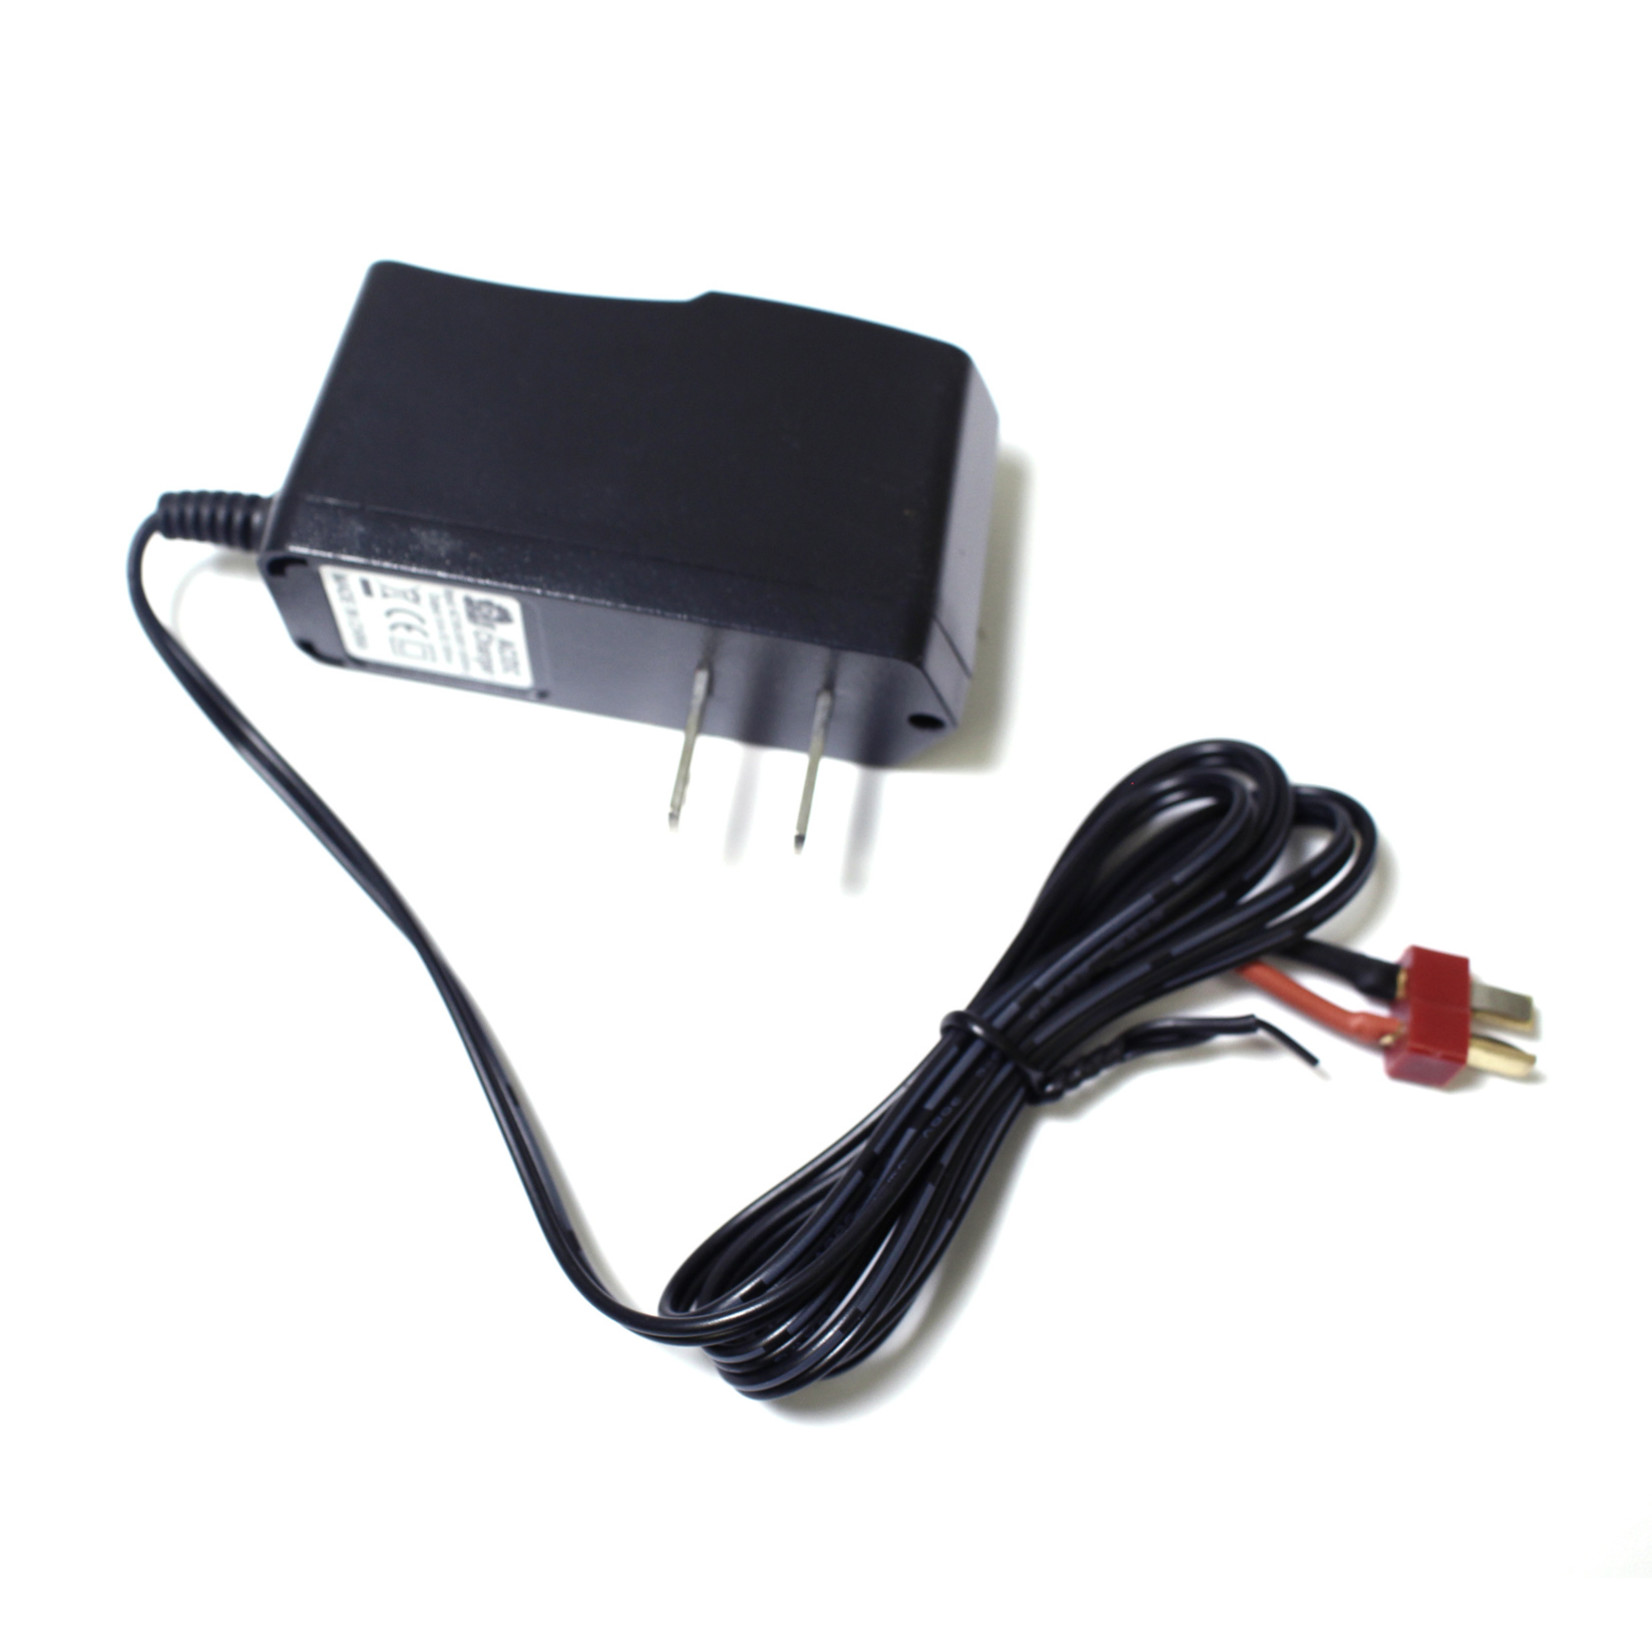 DHK Hobby 7.2V NiMh Battery Charger (T-Connector)